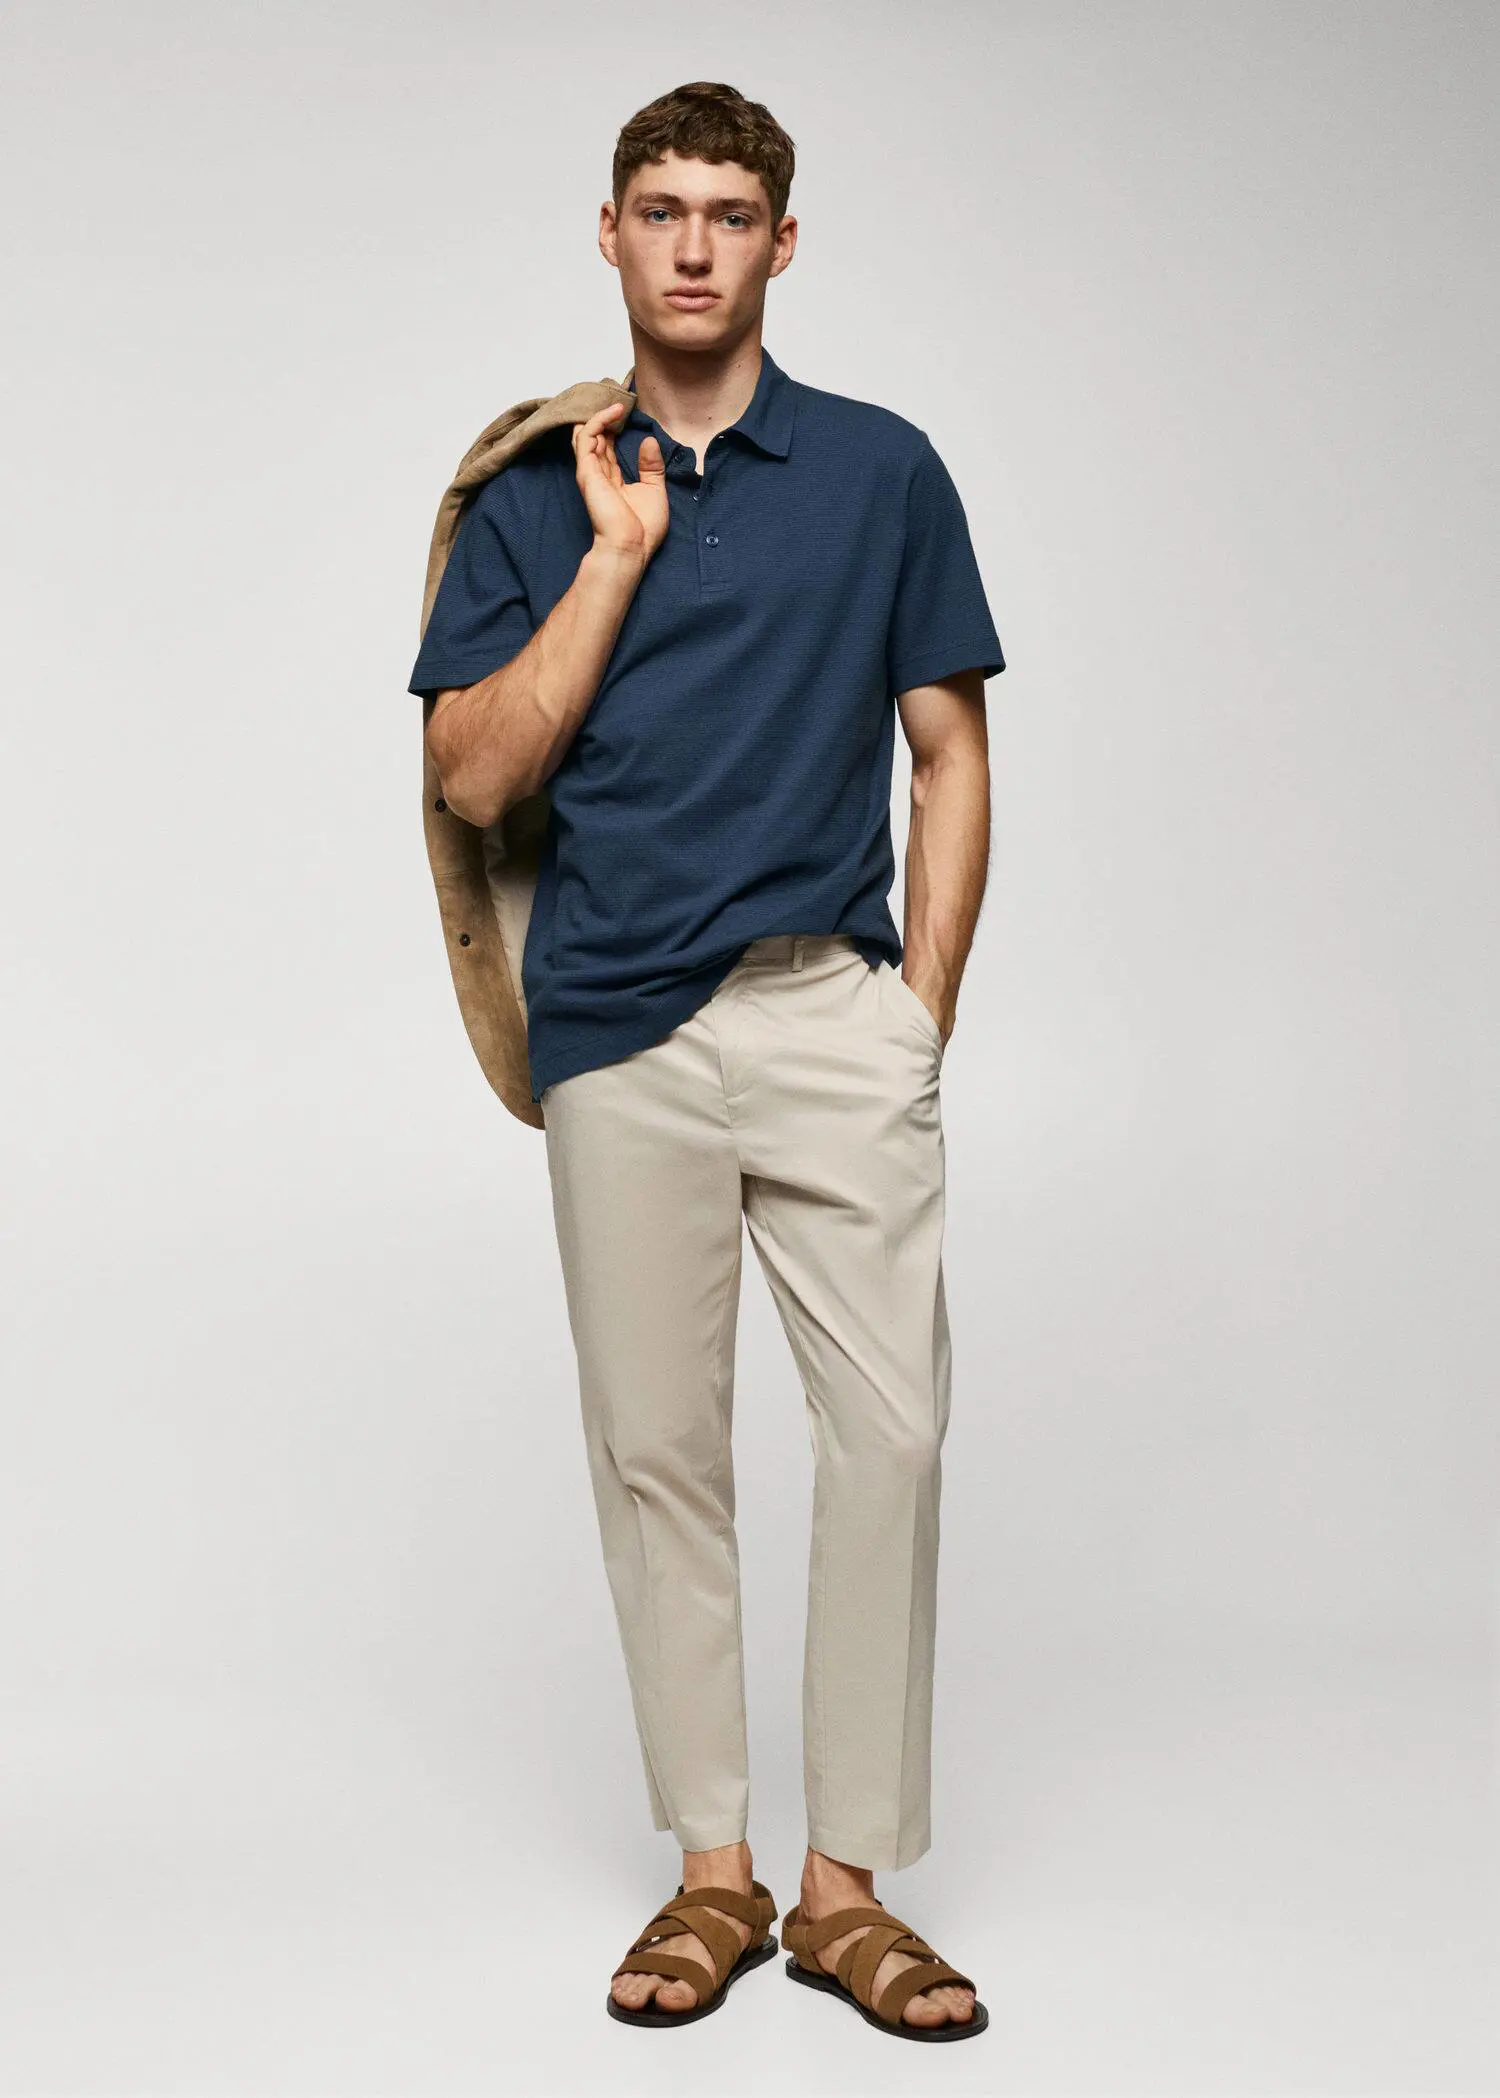 Mango 100% cotton polo shirt with striped structure. a man in a blue polo shirt and beige pants. 